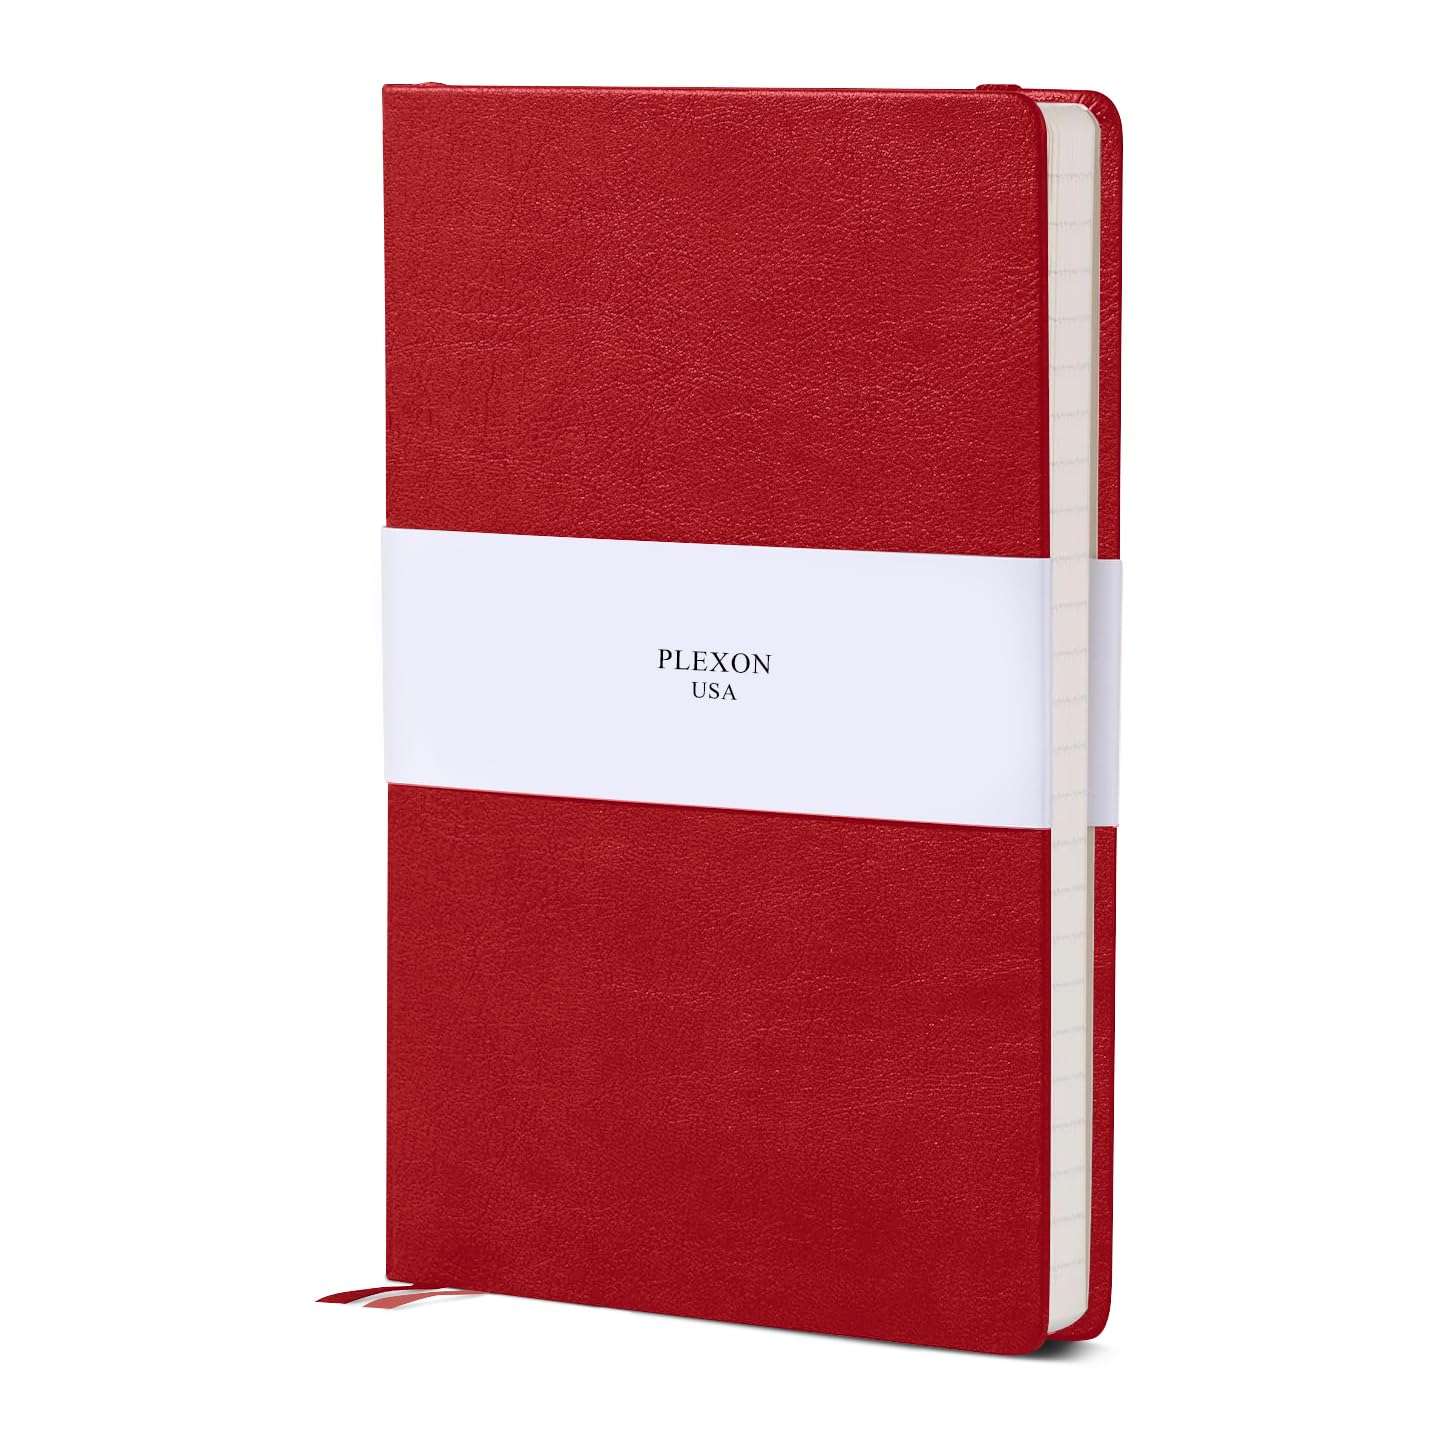 Red A5 Hardcover Vegan Leather Squared Notebook with 120 gsm Graph Cream Paper and Gift Box, 80 Sheets - 2